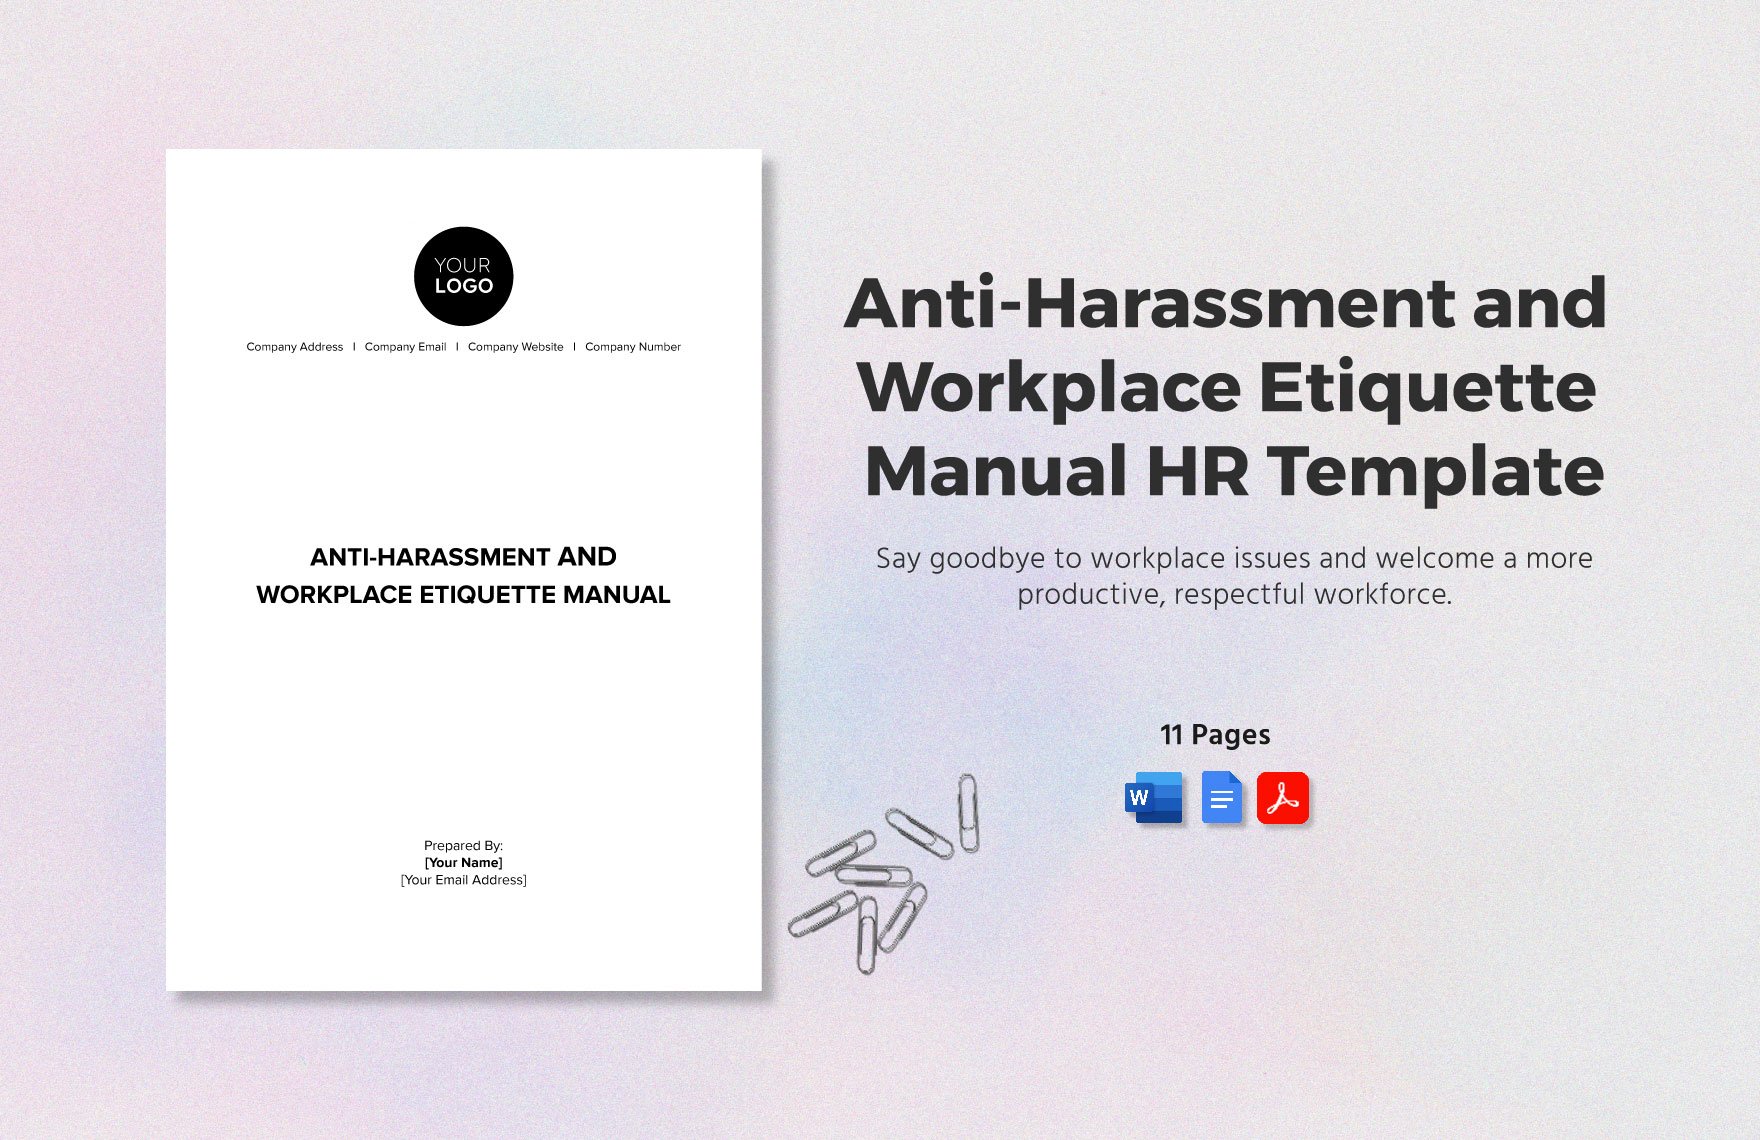 Anti-Harassment and Workplace Etiquette Manual HR Template